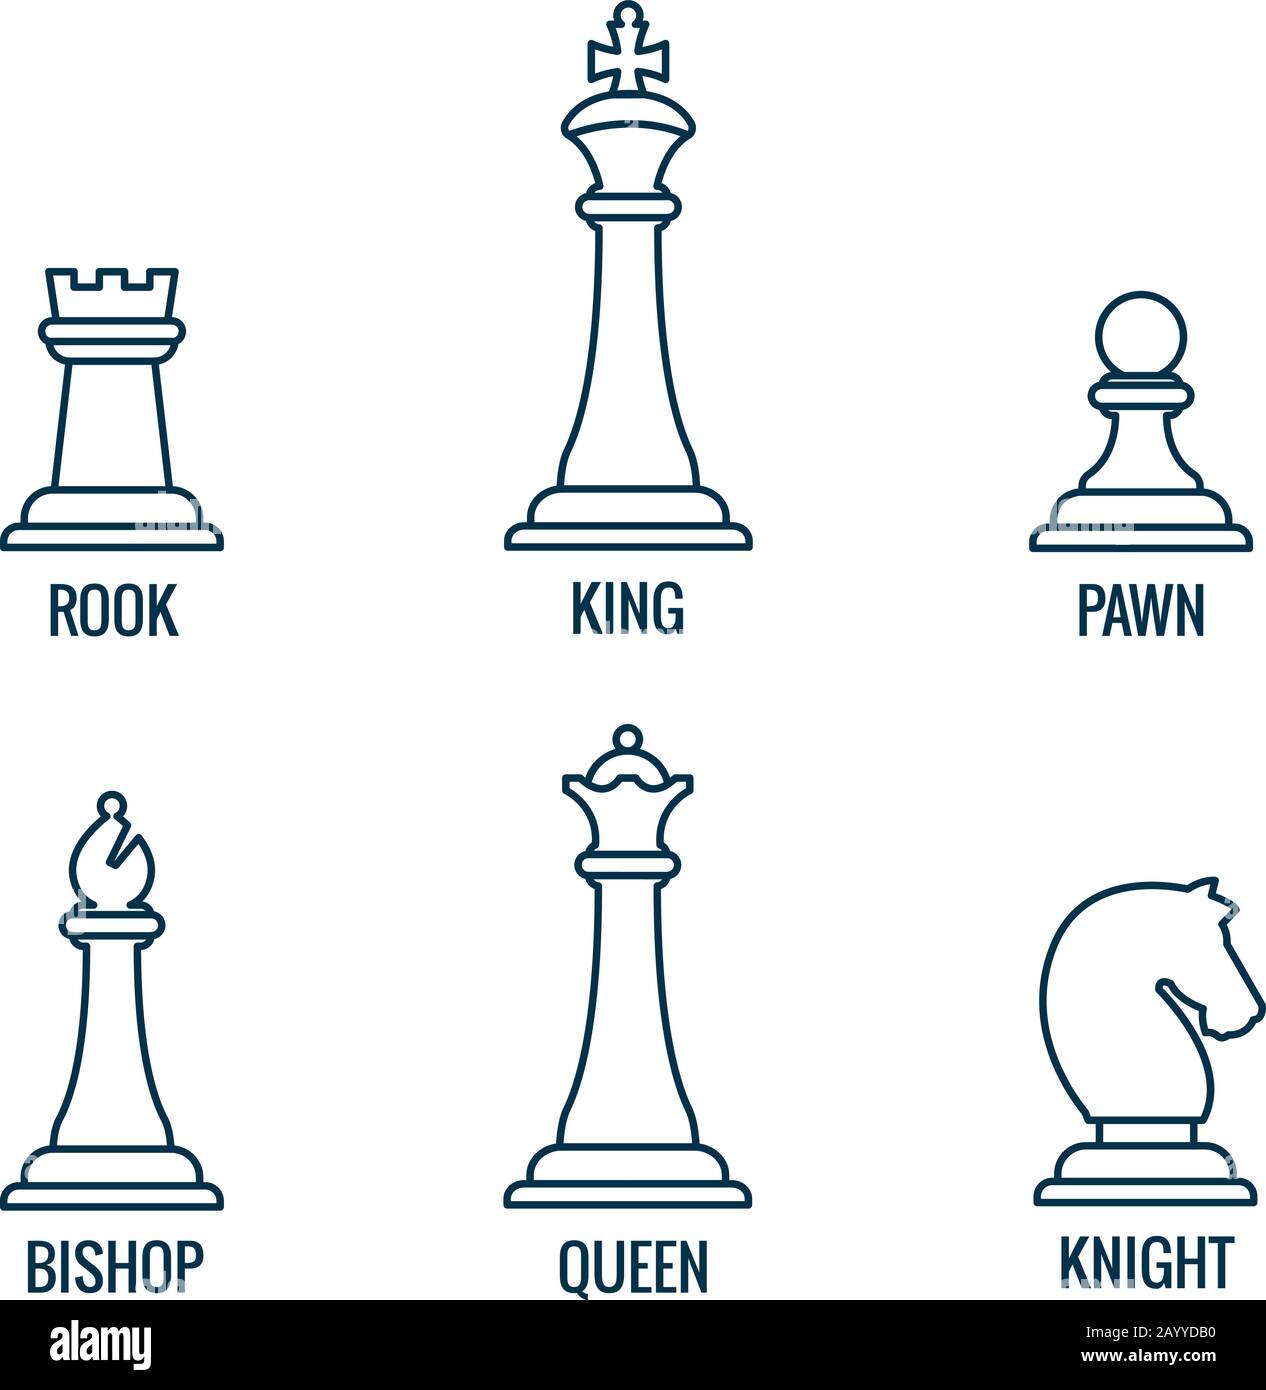 Chess pieces in thin line vector icons, king and queen, bishop and rook, knight and pawn. Set of figure for chess and illustration of chess pieces Stock Vector